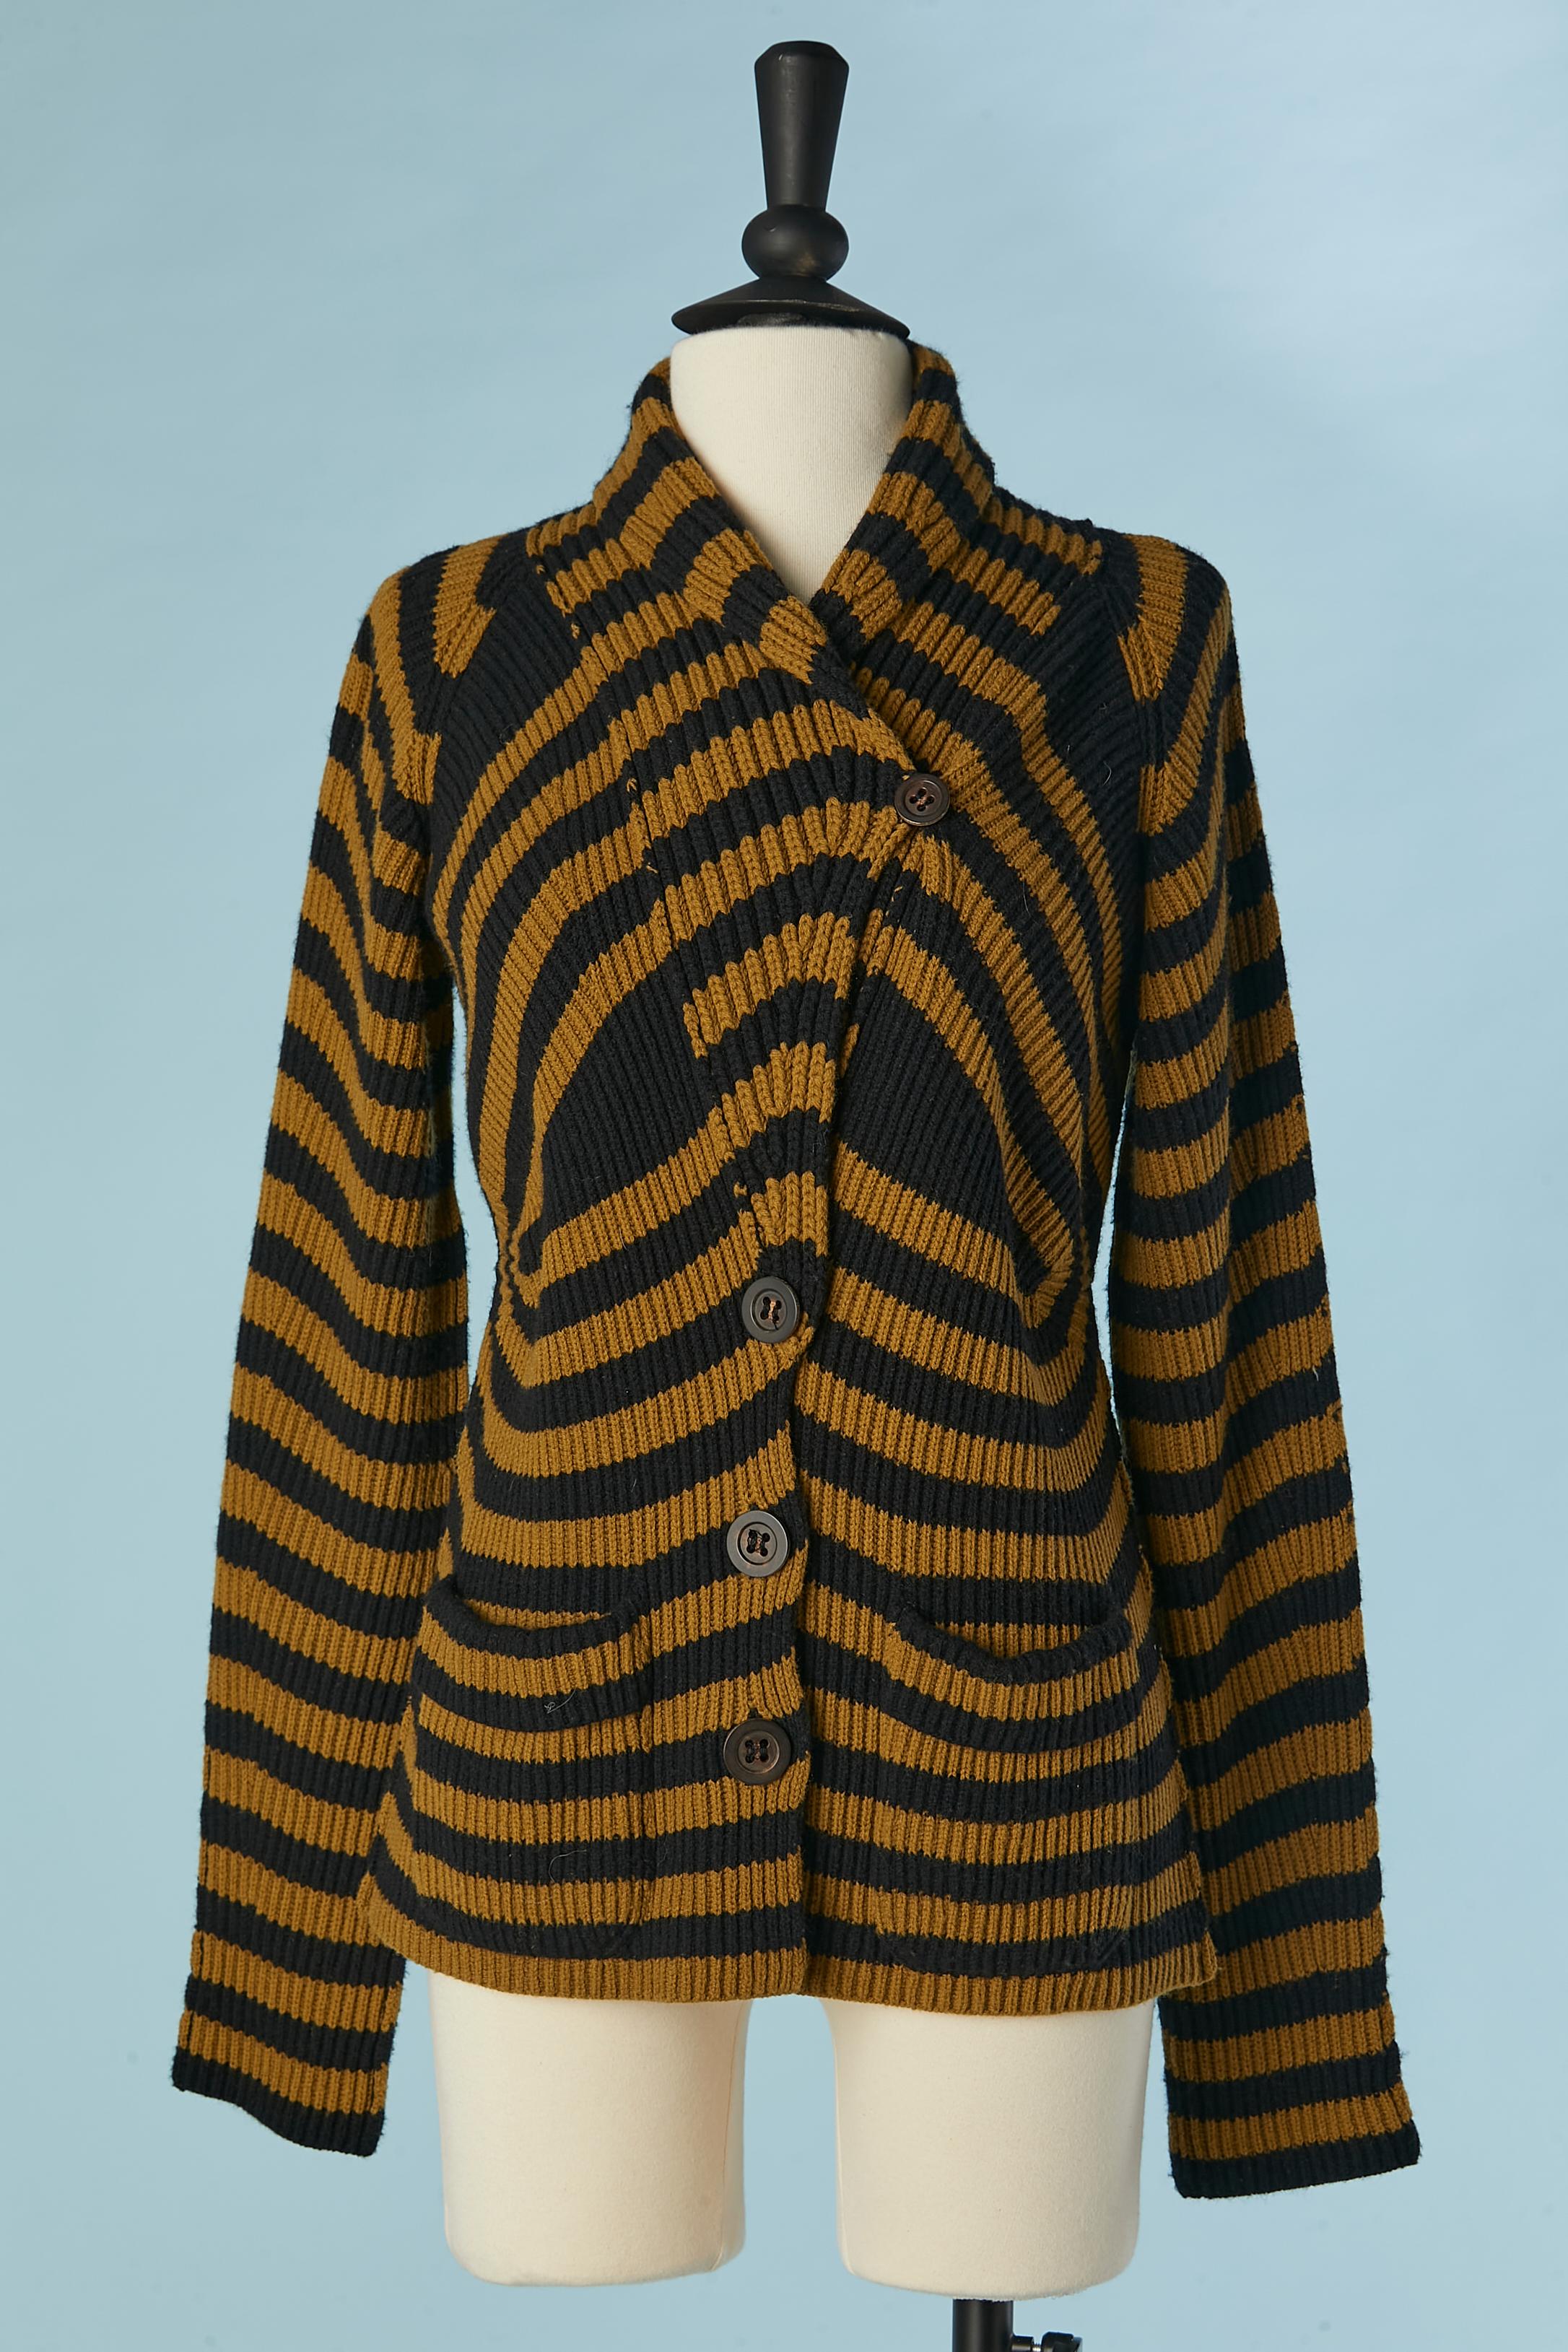 Kaki and black striped wool and cashmere cardigan with scarf Sonia Rykiel  In Excellent Condition For Sale In Saint-Ouen-Sur-Seine, FR